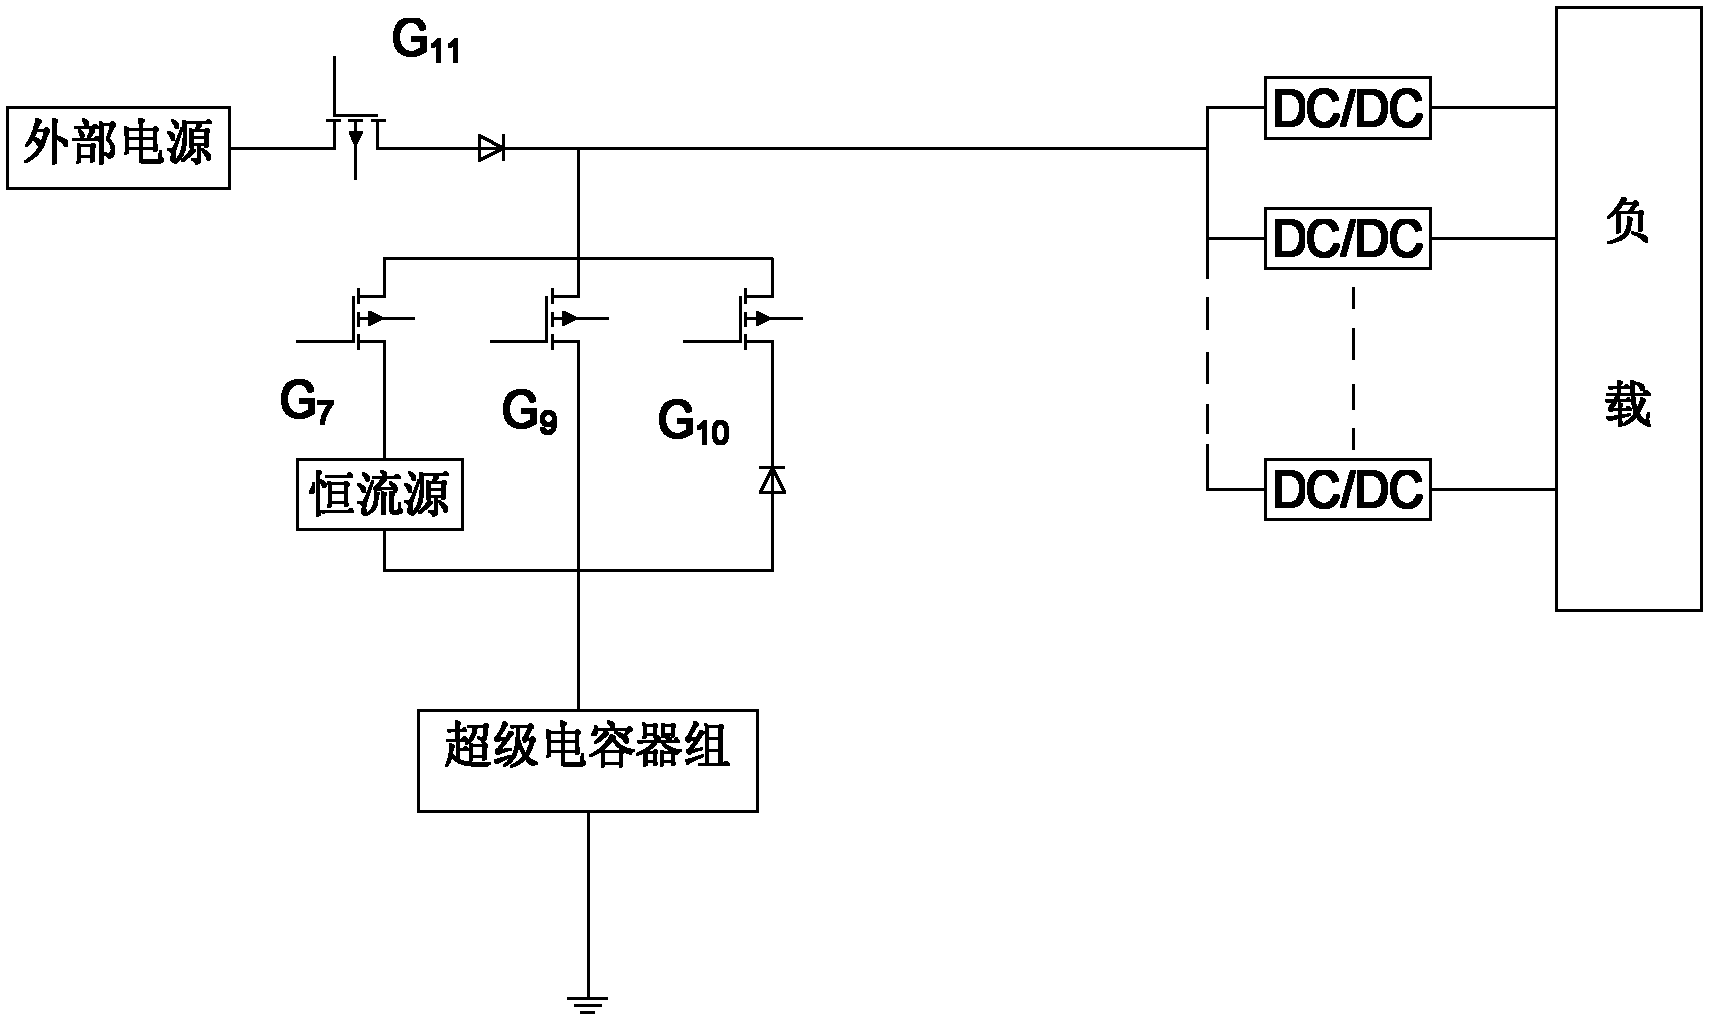 A continuous power supply system for a relay protection device